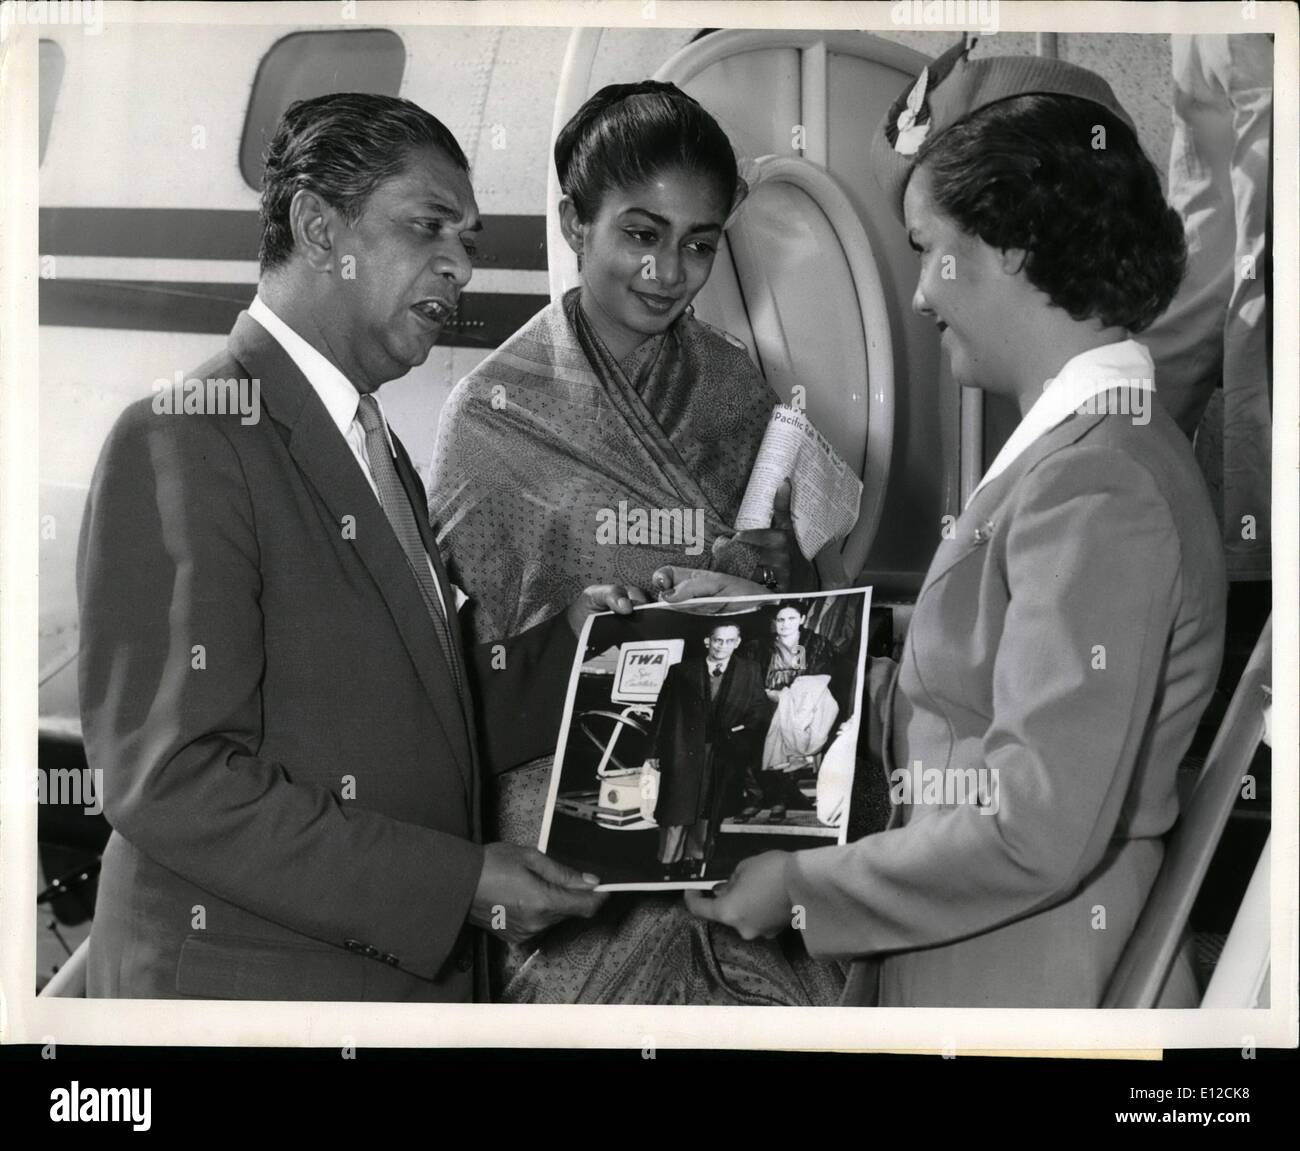 Dec. 12, 2011 - N.Y. international airport, Sept. 26 -- Ceylonese minister of finance, Stanley De zoysa and his daughter, Mrs. Roma jinadasa, both having arrived only yesterday morning from Colombo, are presented with a photograph of the late prime minister of Ceylon, s.w.r.d. bandaranaike (Taken during his last visit to the united states in November, 1956), by TWA hostess Denis luedtke prior to boarding a TWA jetstream back to Colombo. Mr. De zoysa was advised of the prime minister's assassination on arrival yesterday and is restringing to attend the feral cervices on Wednesday. Stock Photo